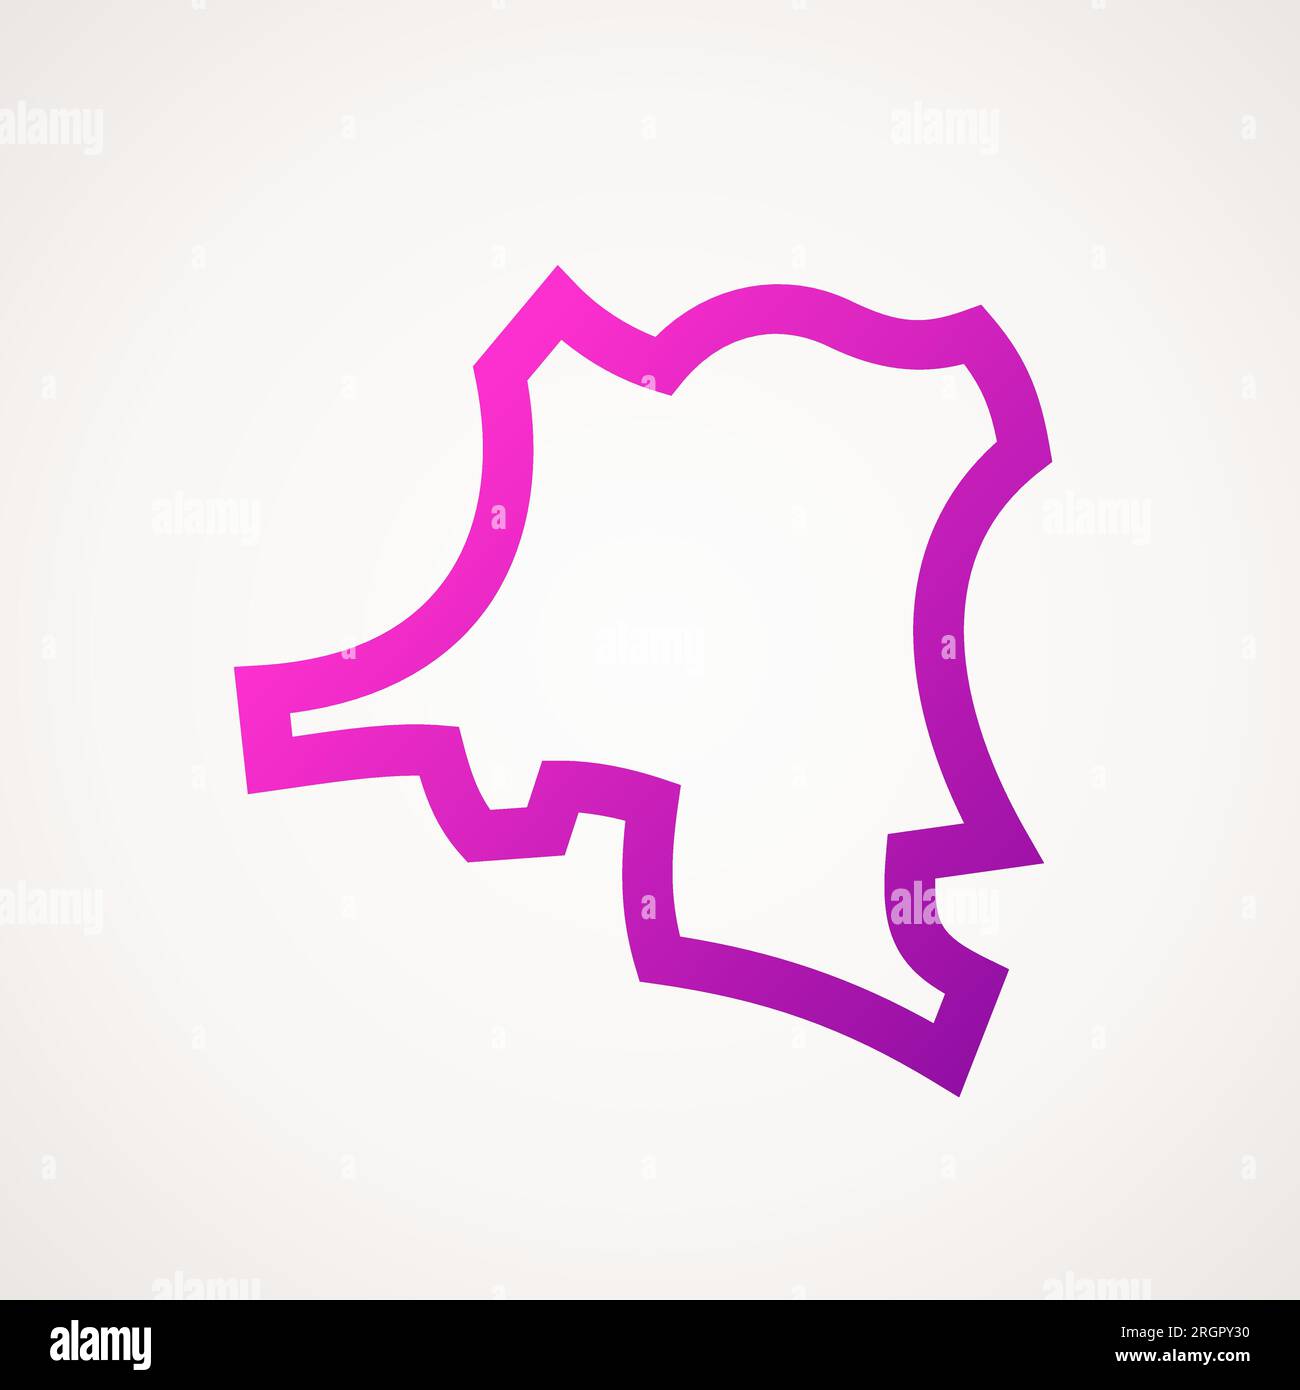 Simplified stylized outline map of DR Congo. Stock Vector